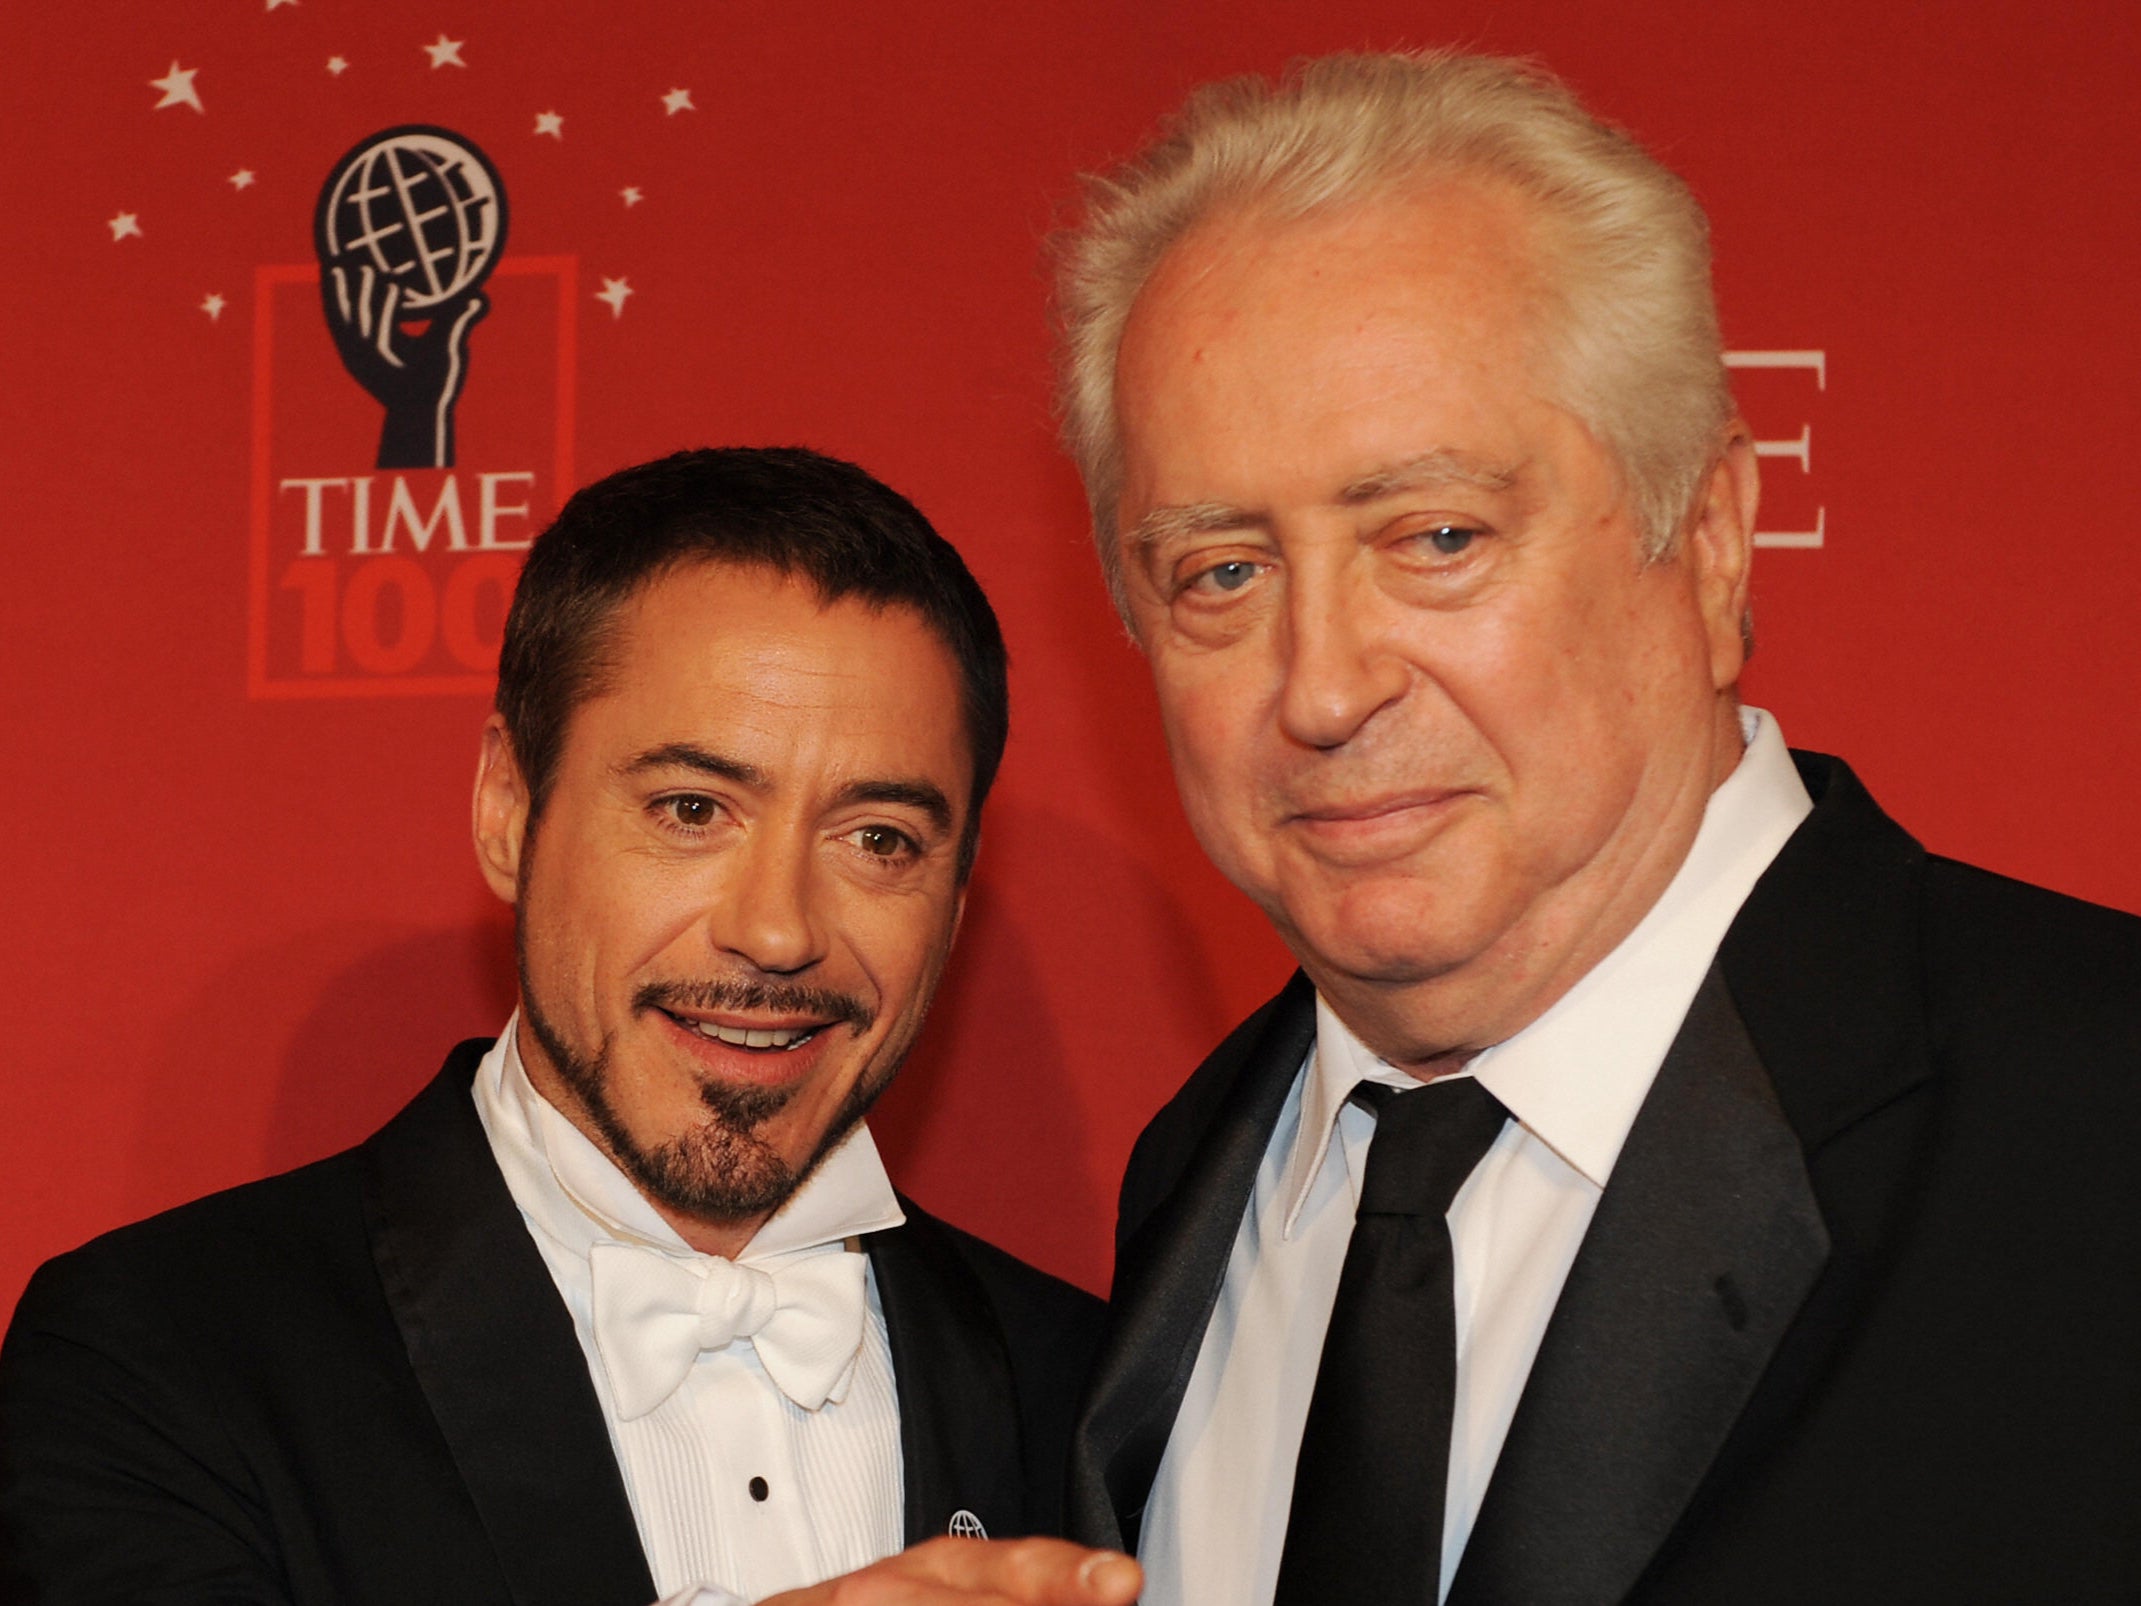 Actor Robert Downey Jr and his father Robert Downey Sr at Time Magazine’s 100 Most Influential People in the World dinner on 8 May 2008 in New York